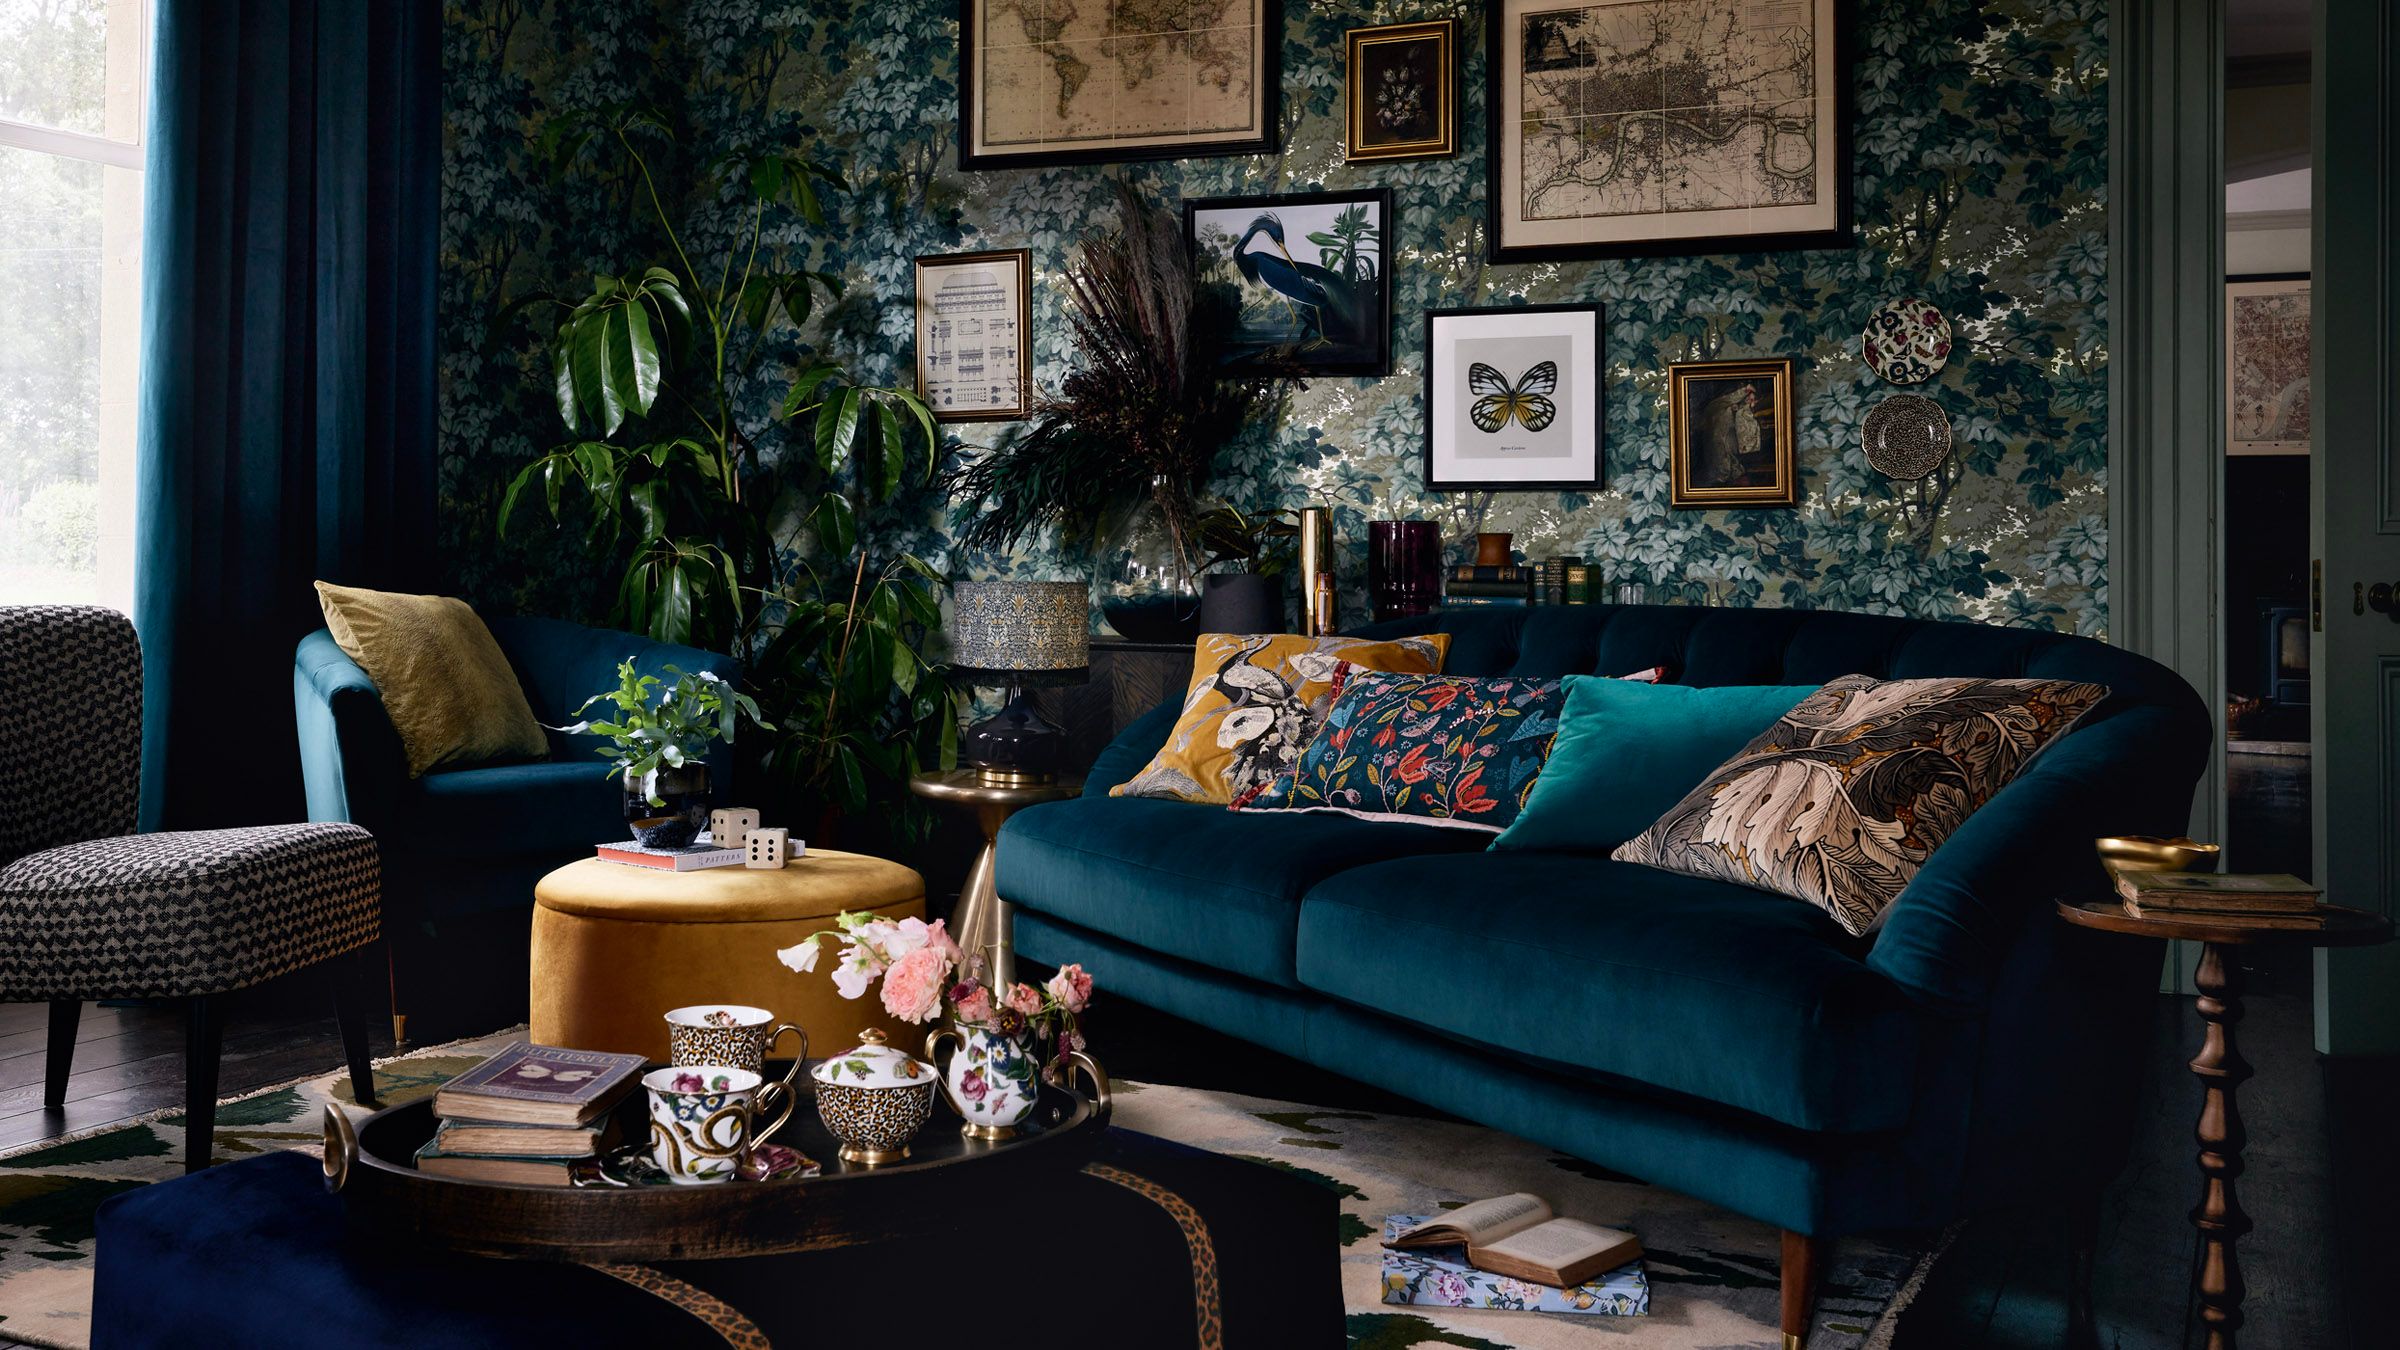 Maximalist decor inspiration for your living room